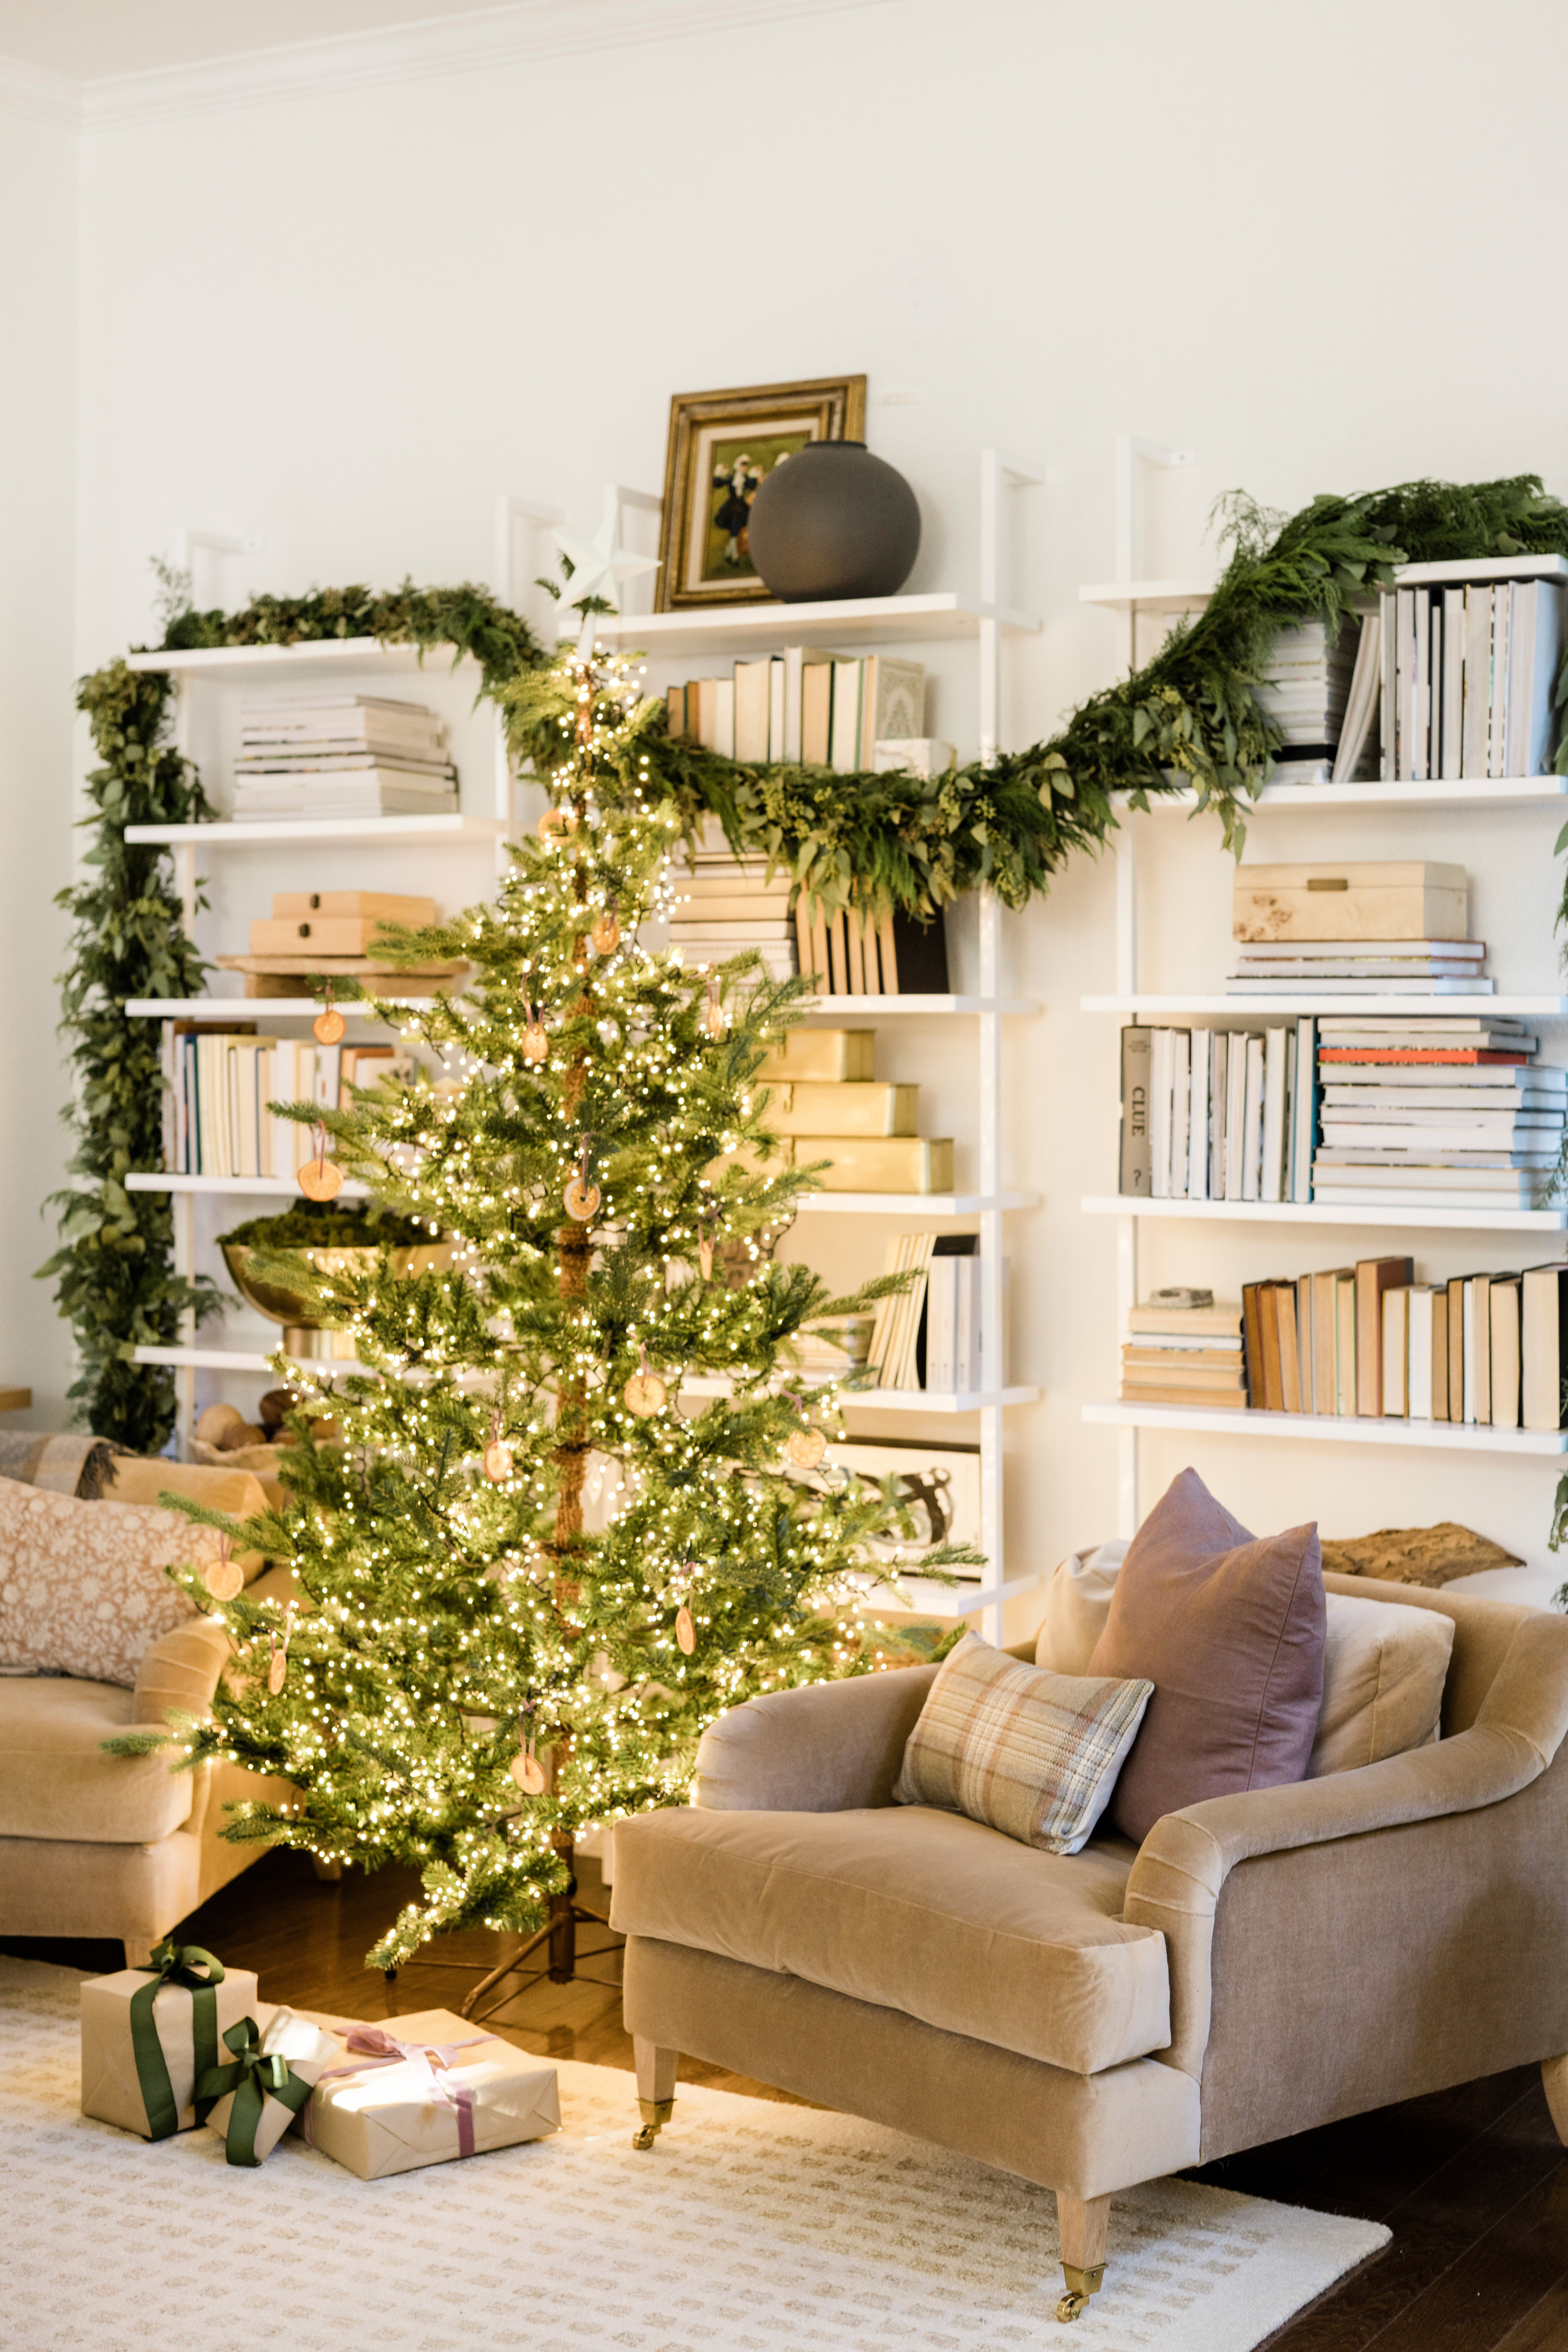 neutral Living room holiday decor with fresh greens, holiday home tour